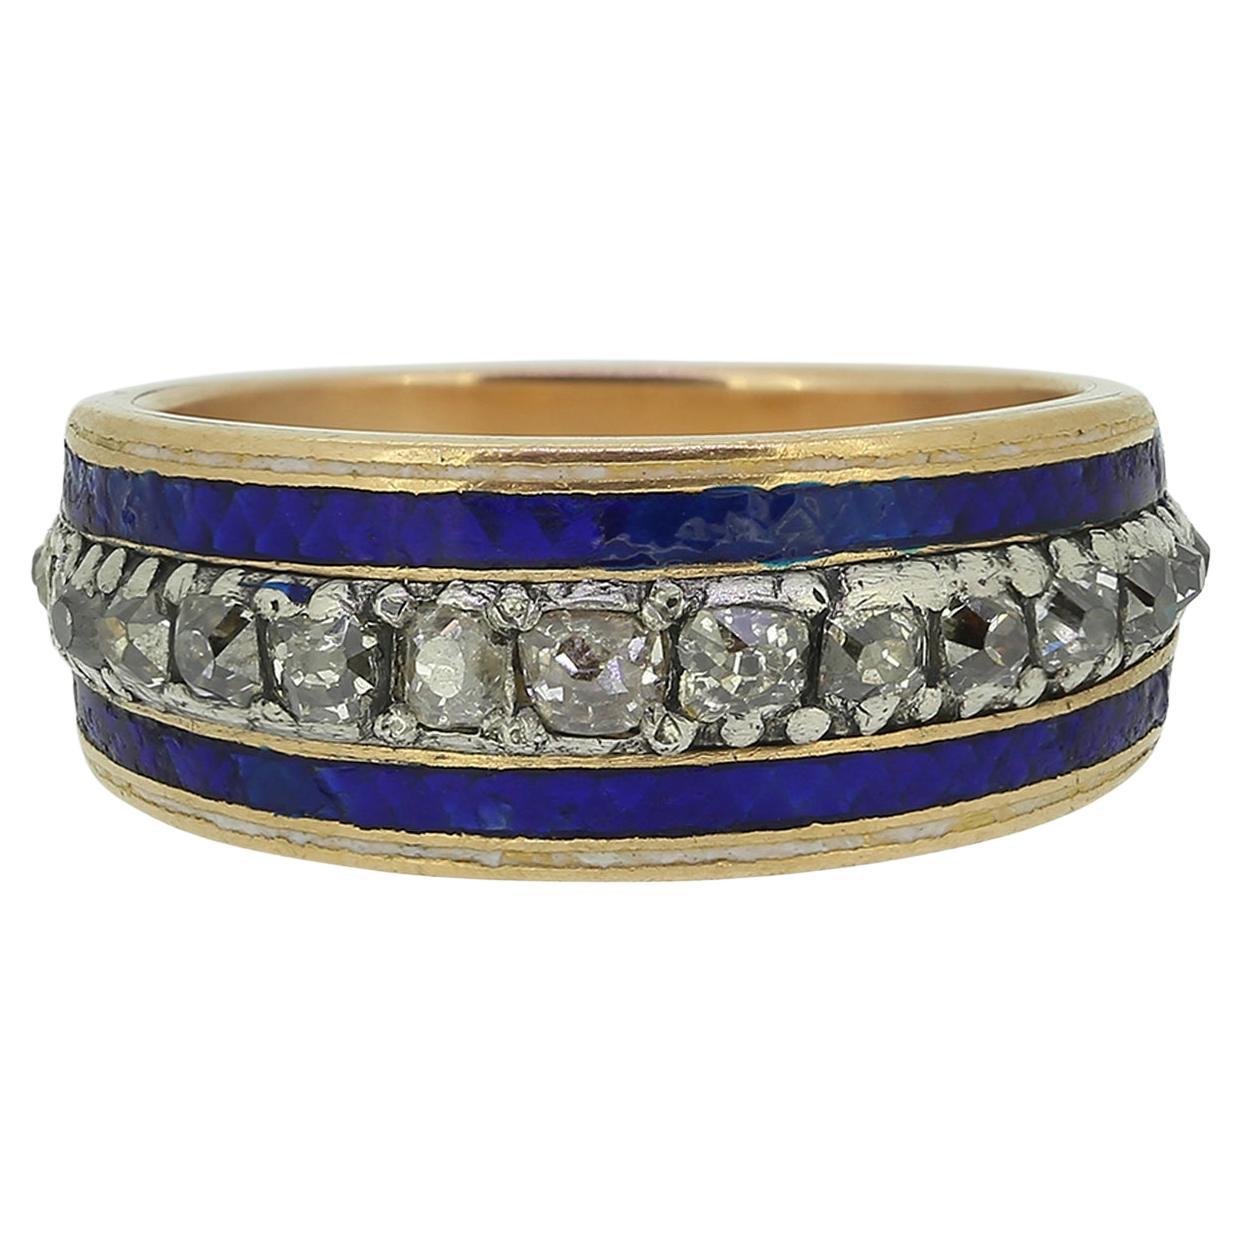 Antique Blue Enamel and Diamond Band Ring